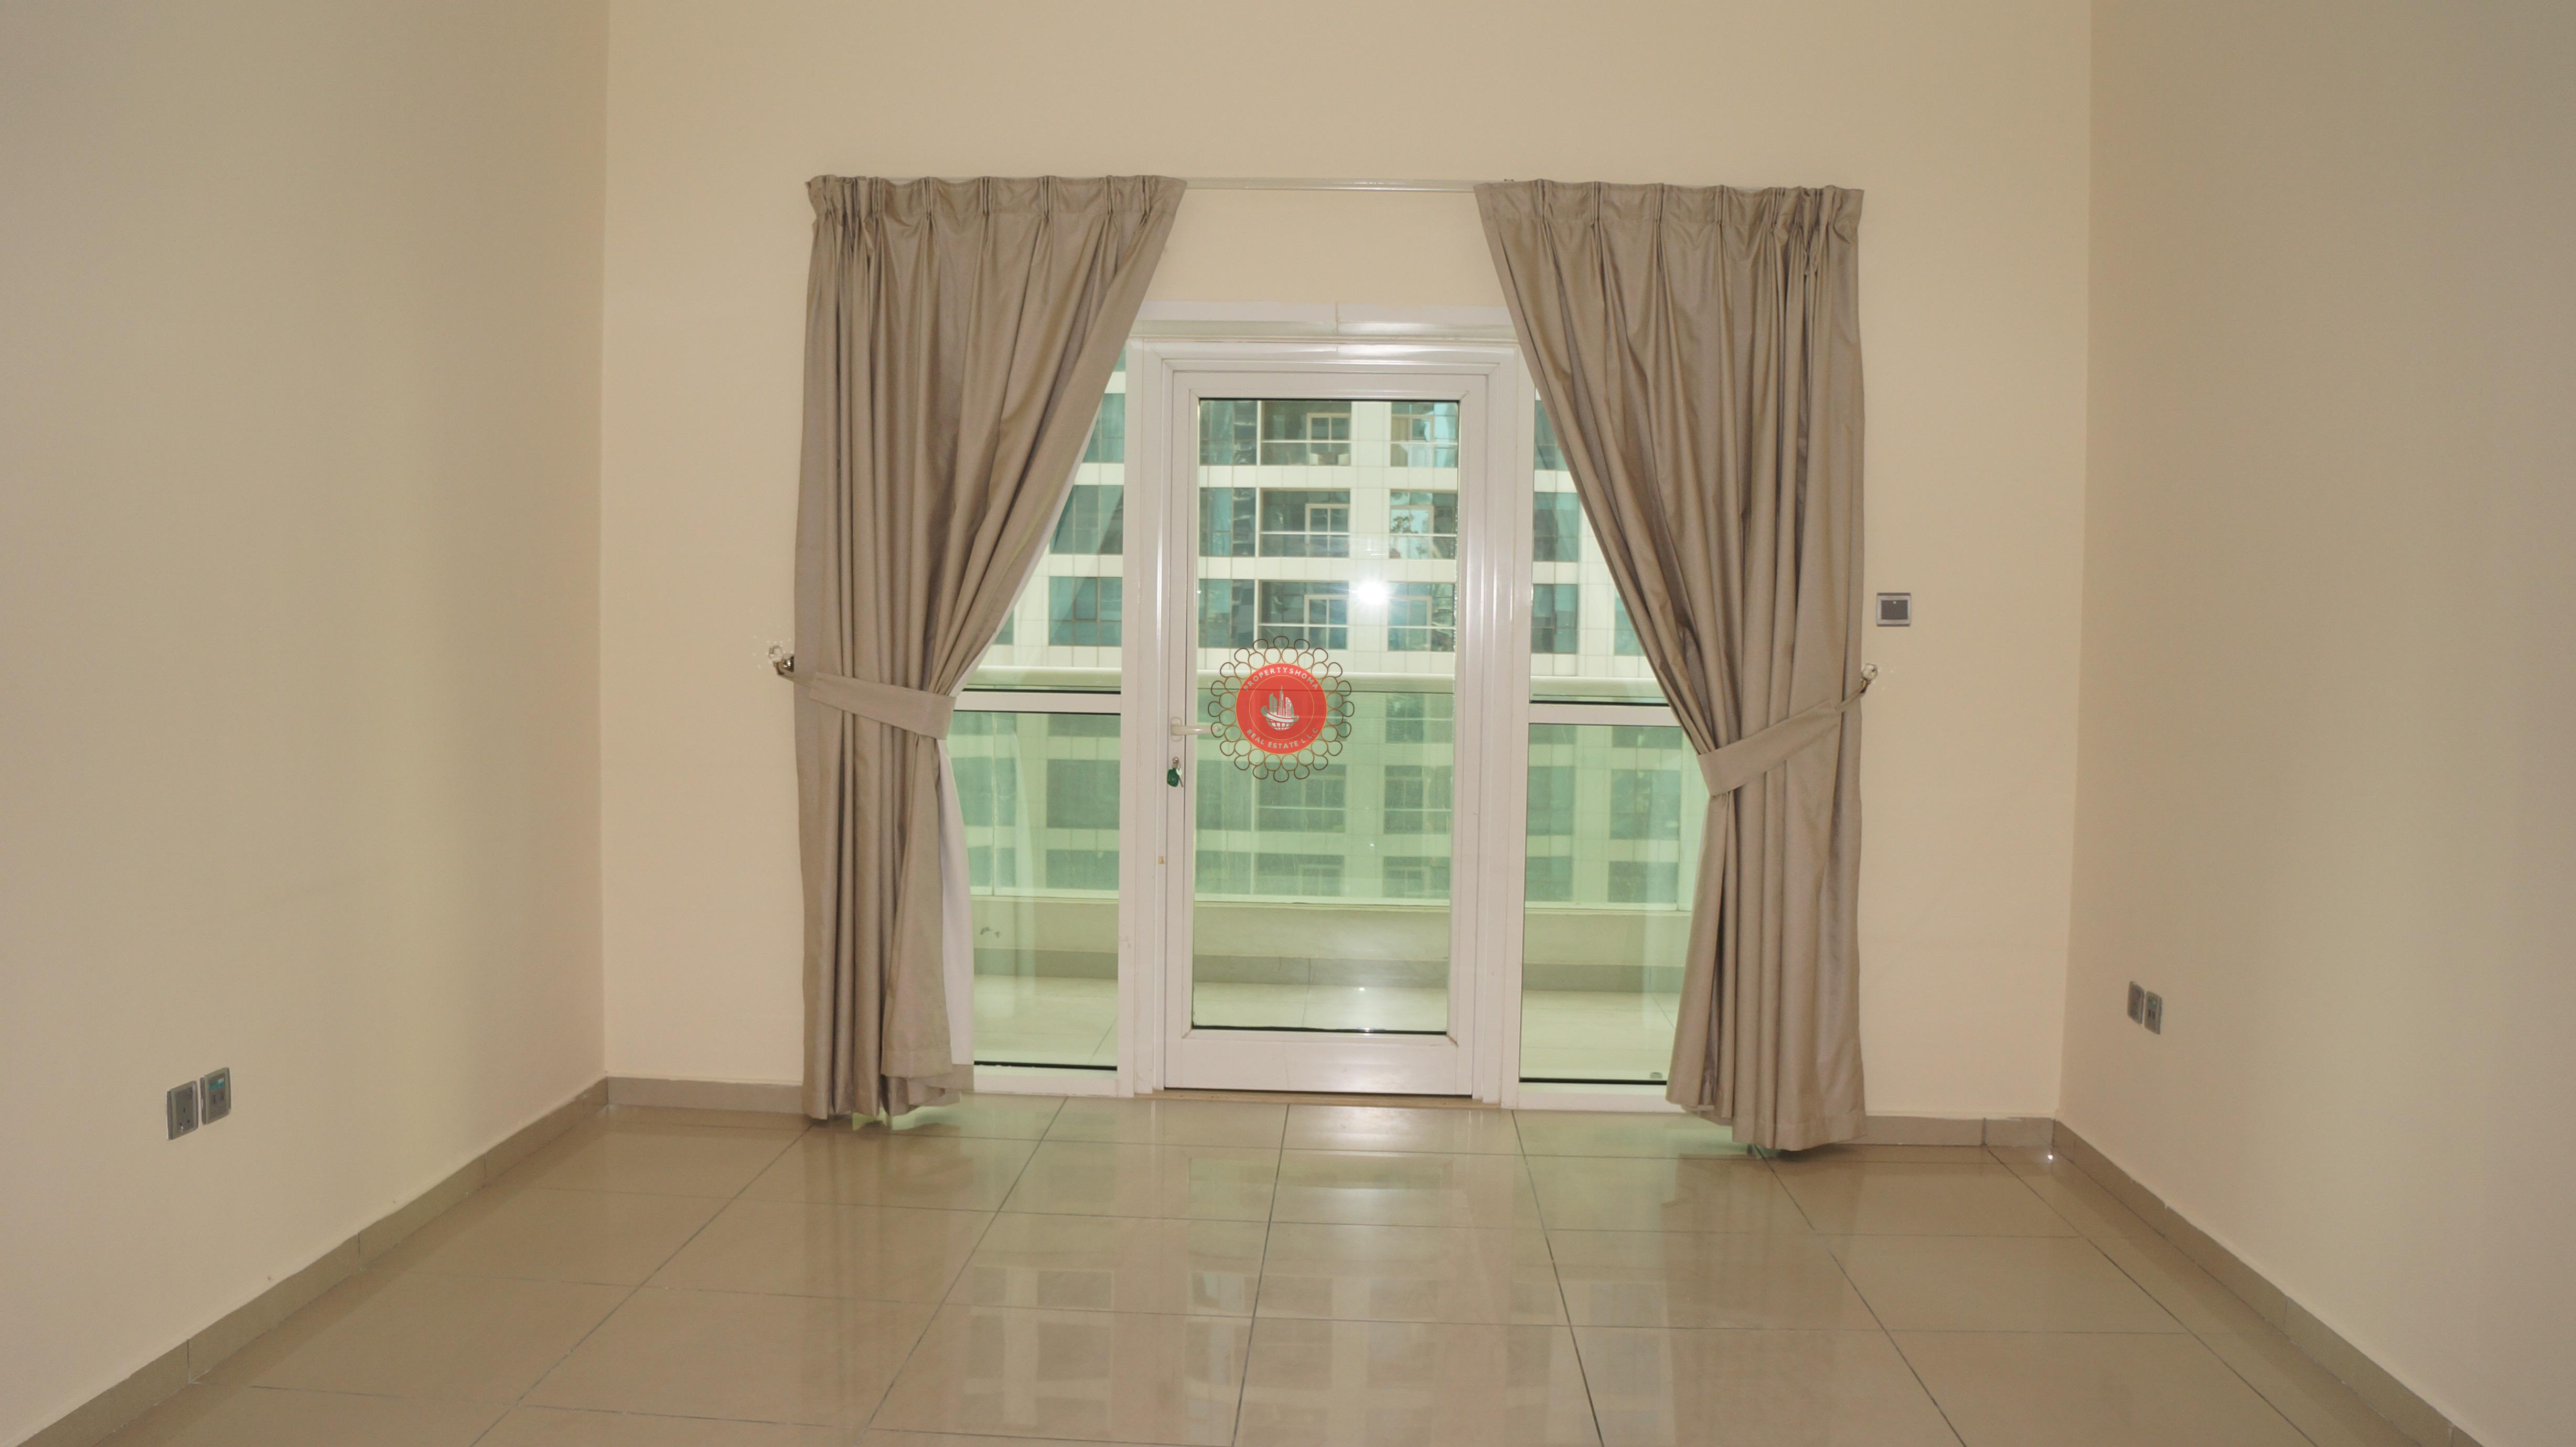 Ac Free |1 bedroom  Specious | Unfurnished